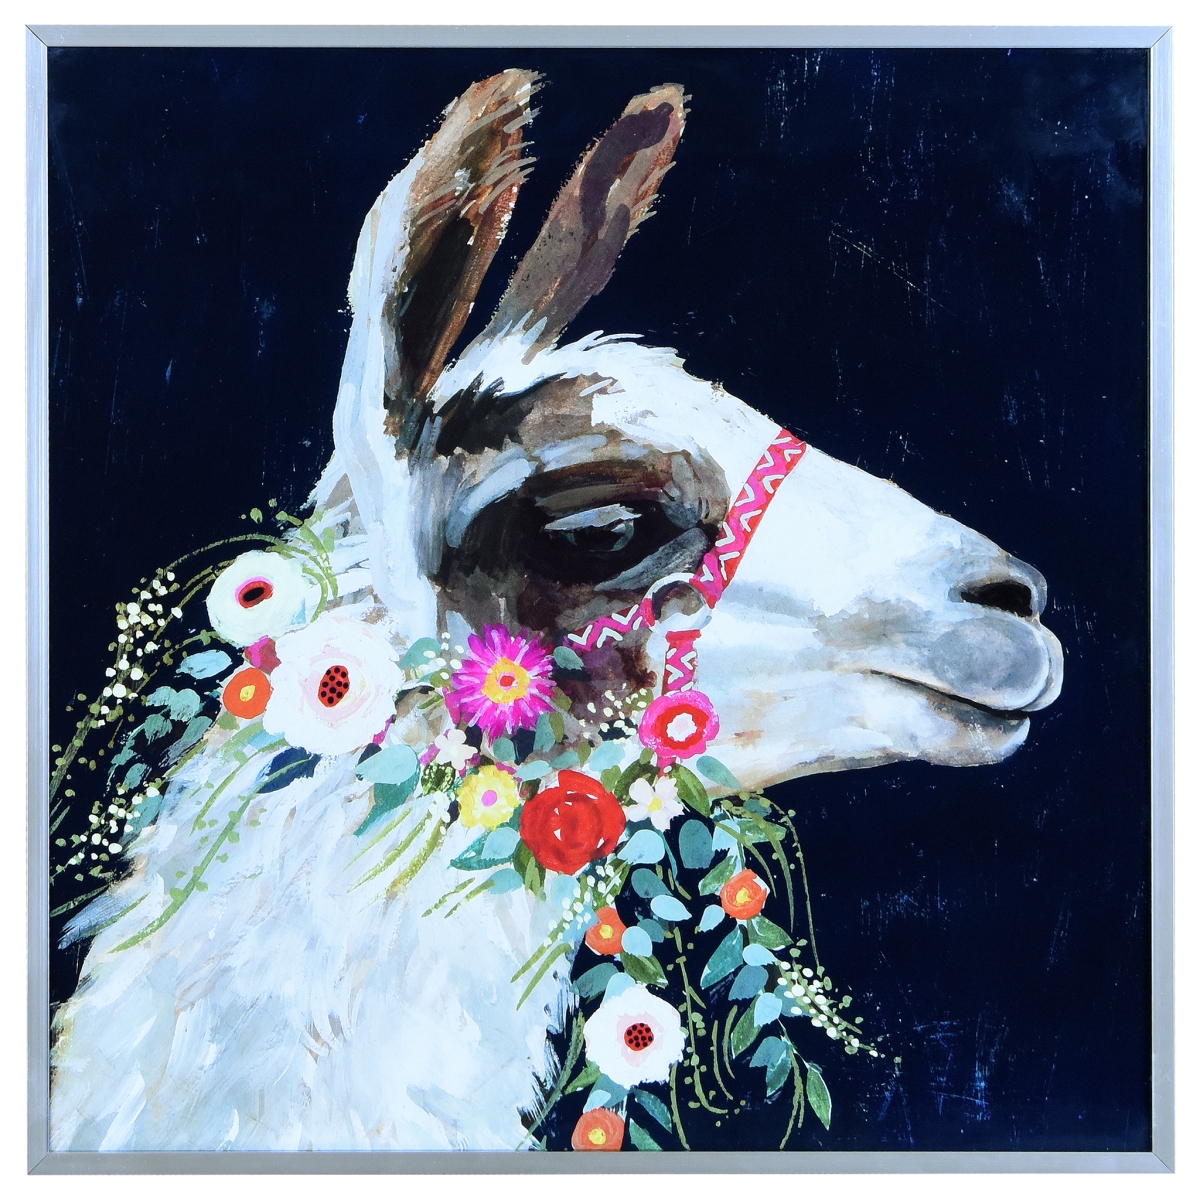 Aags-134047-1616 16 X 16 In. White Llama Reverse Printed Glass & Anodized Aluminum Silver Frame Contemporary Wall Art